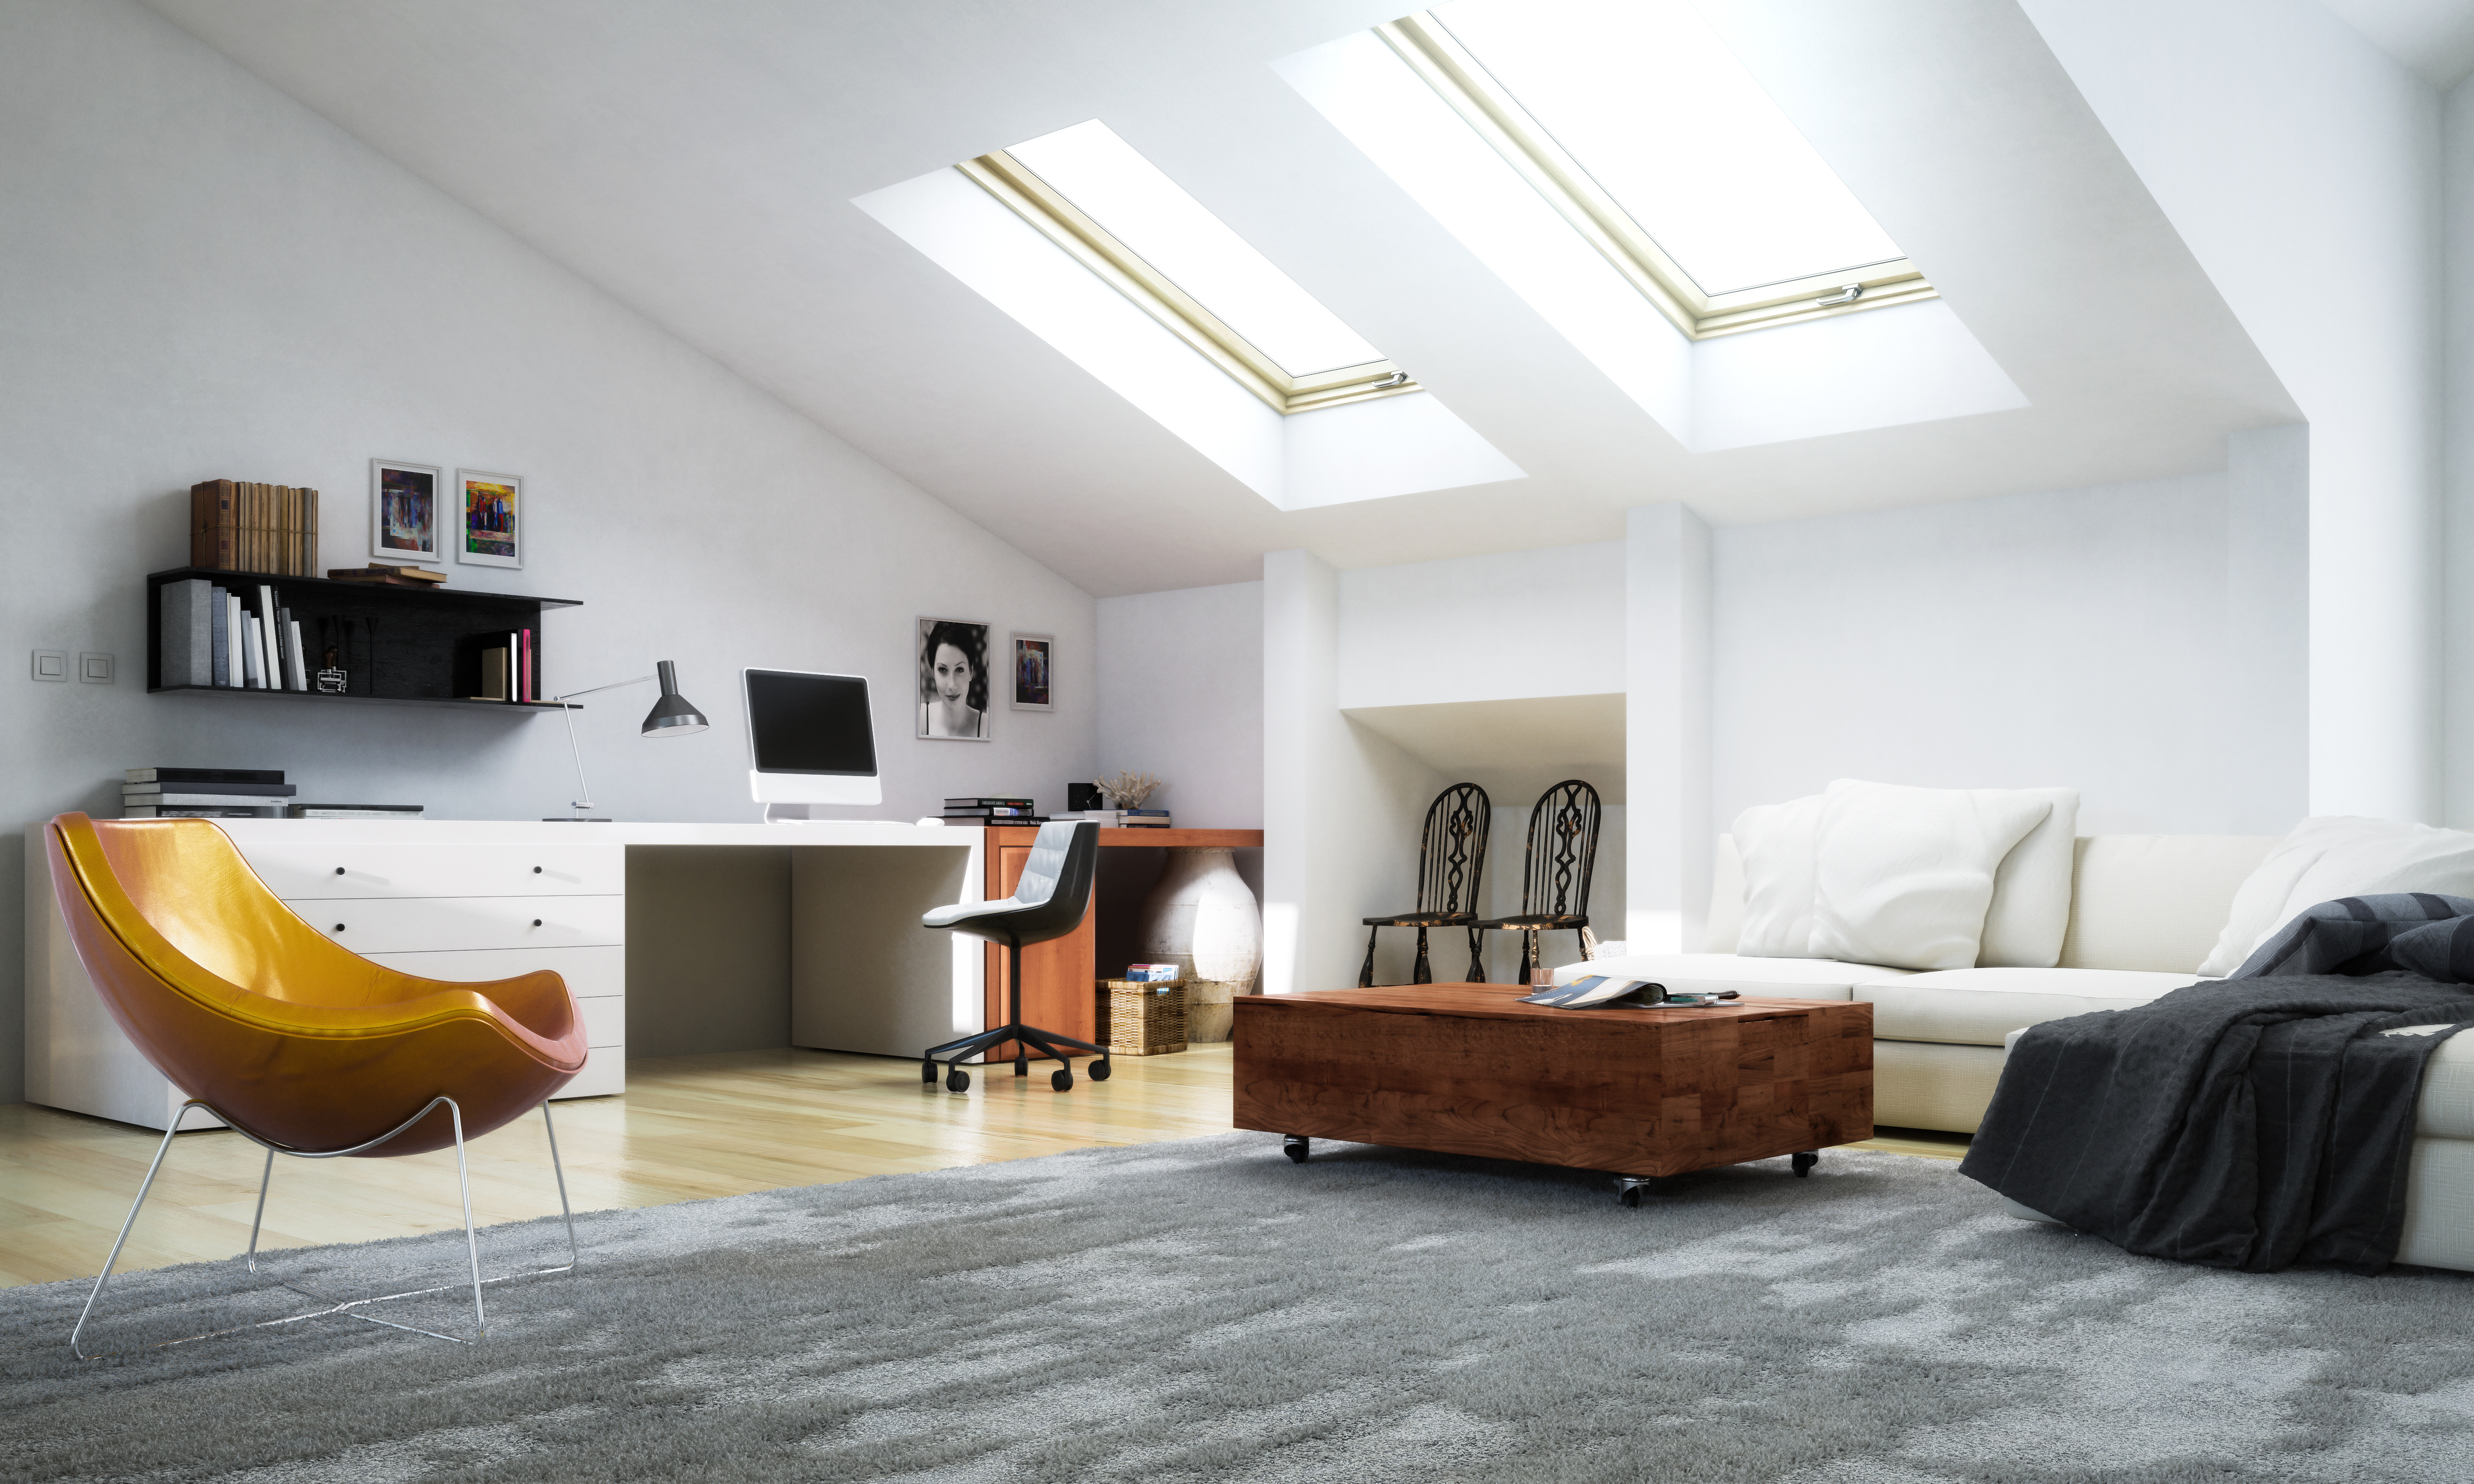 Loft conversions increase value of your home